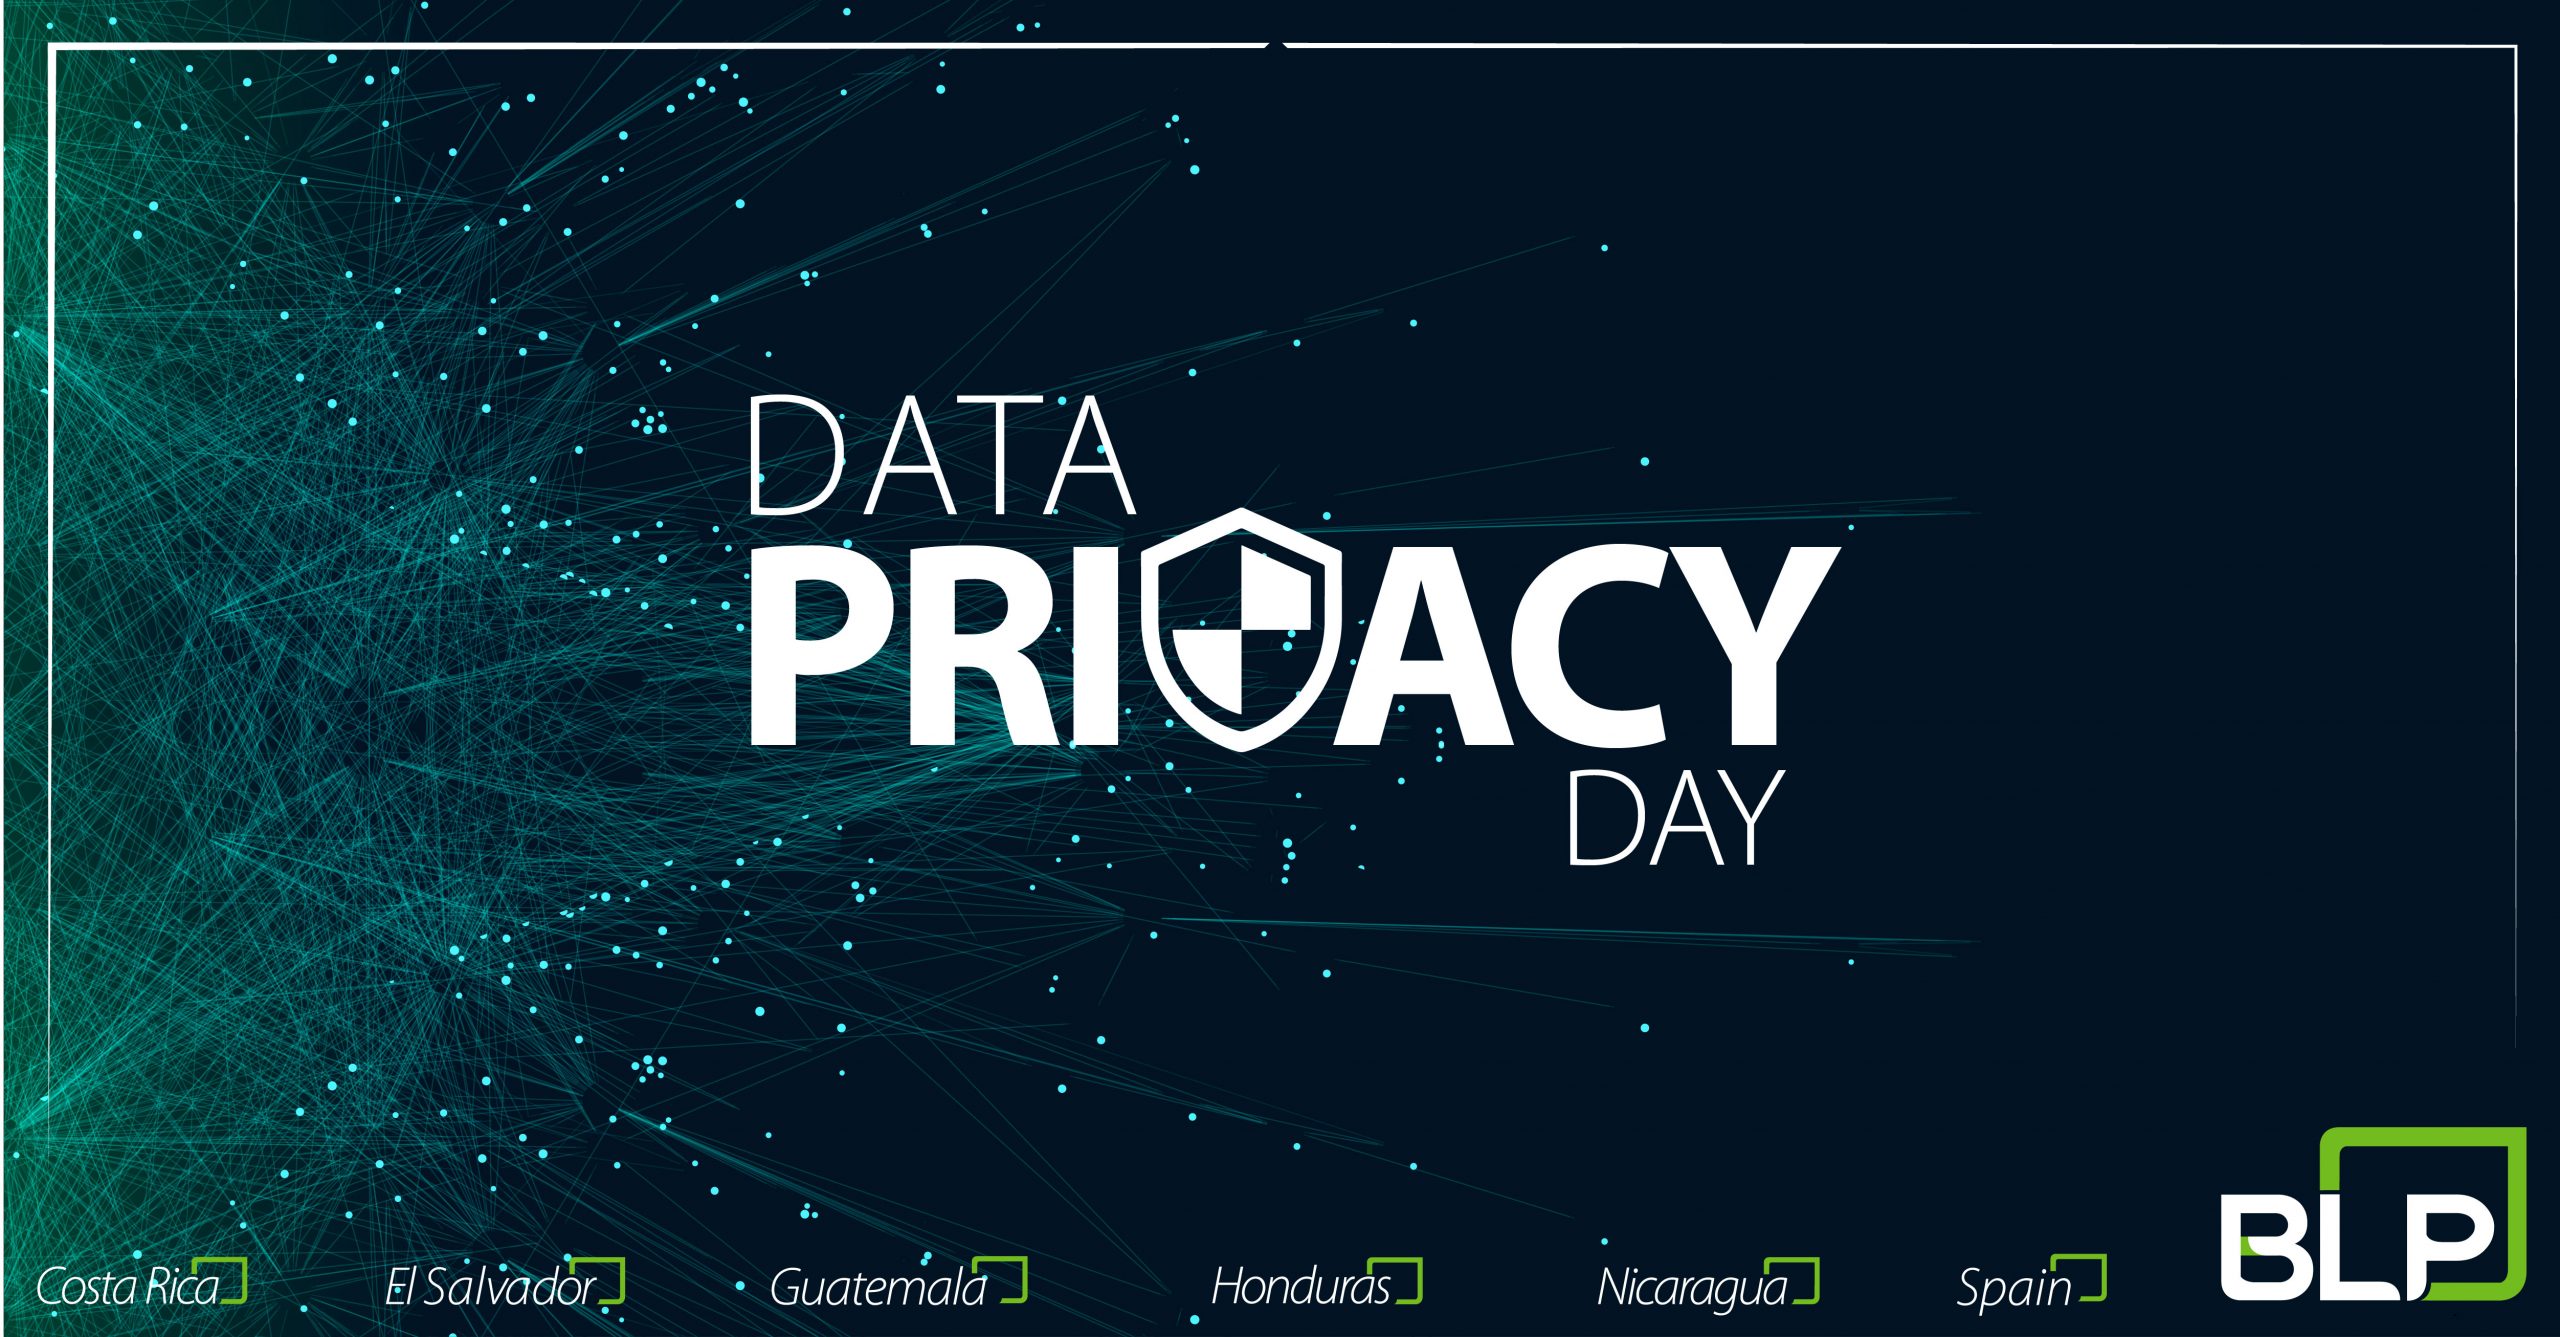 BLP celebrates International Data Privacy Day by fostering an awareness of our personal information